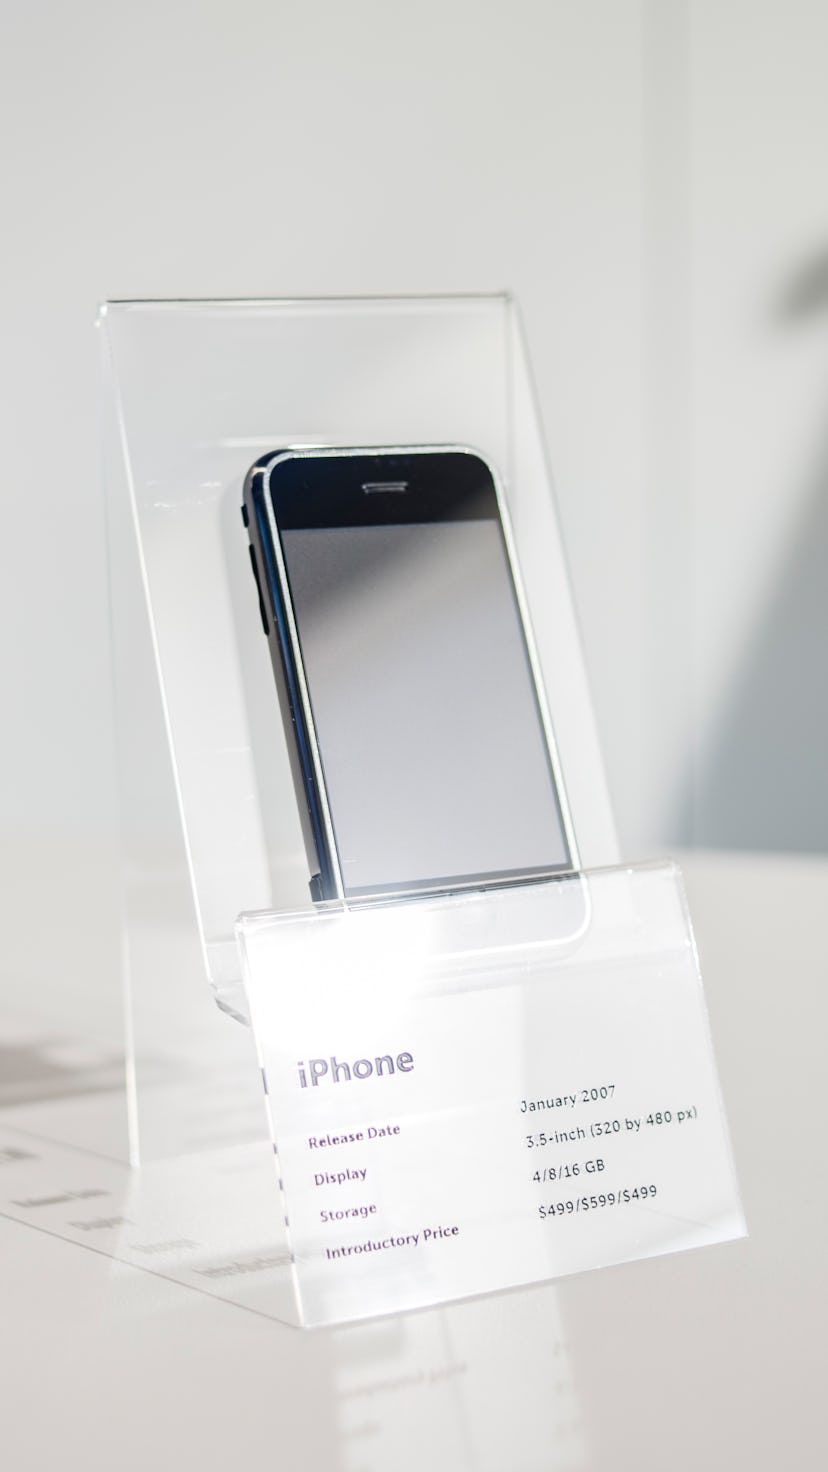 An original iphone on display at the apple museum in Kiev.